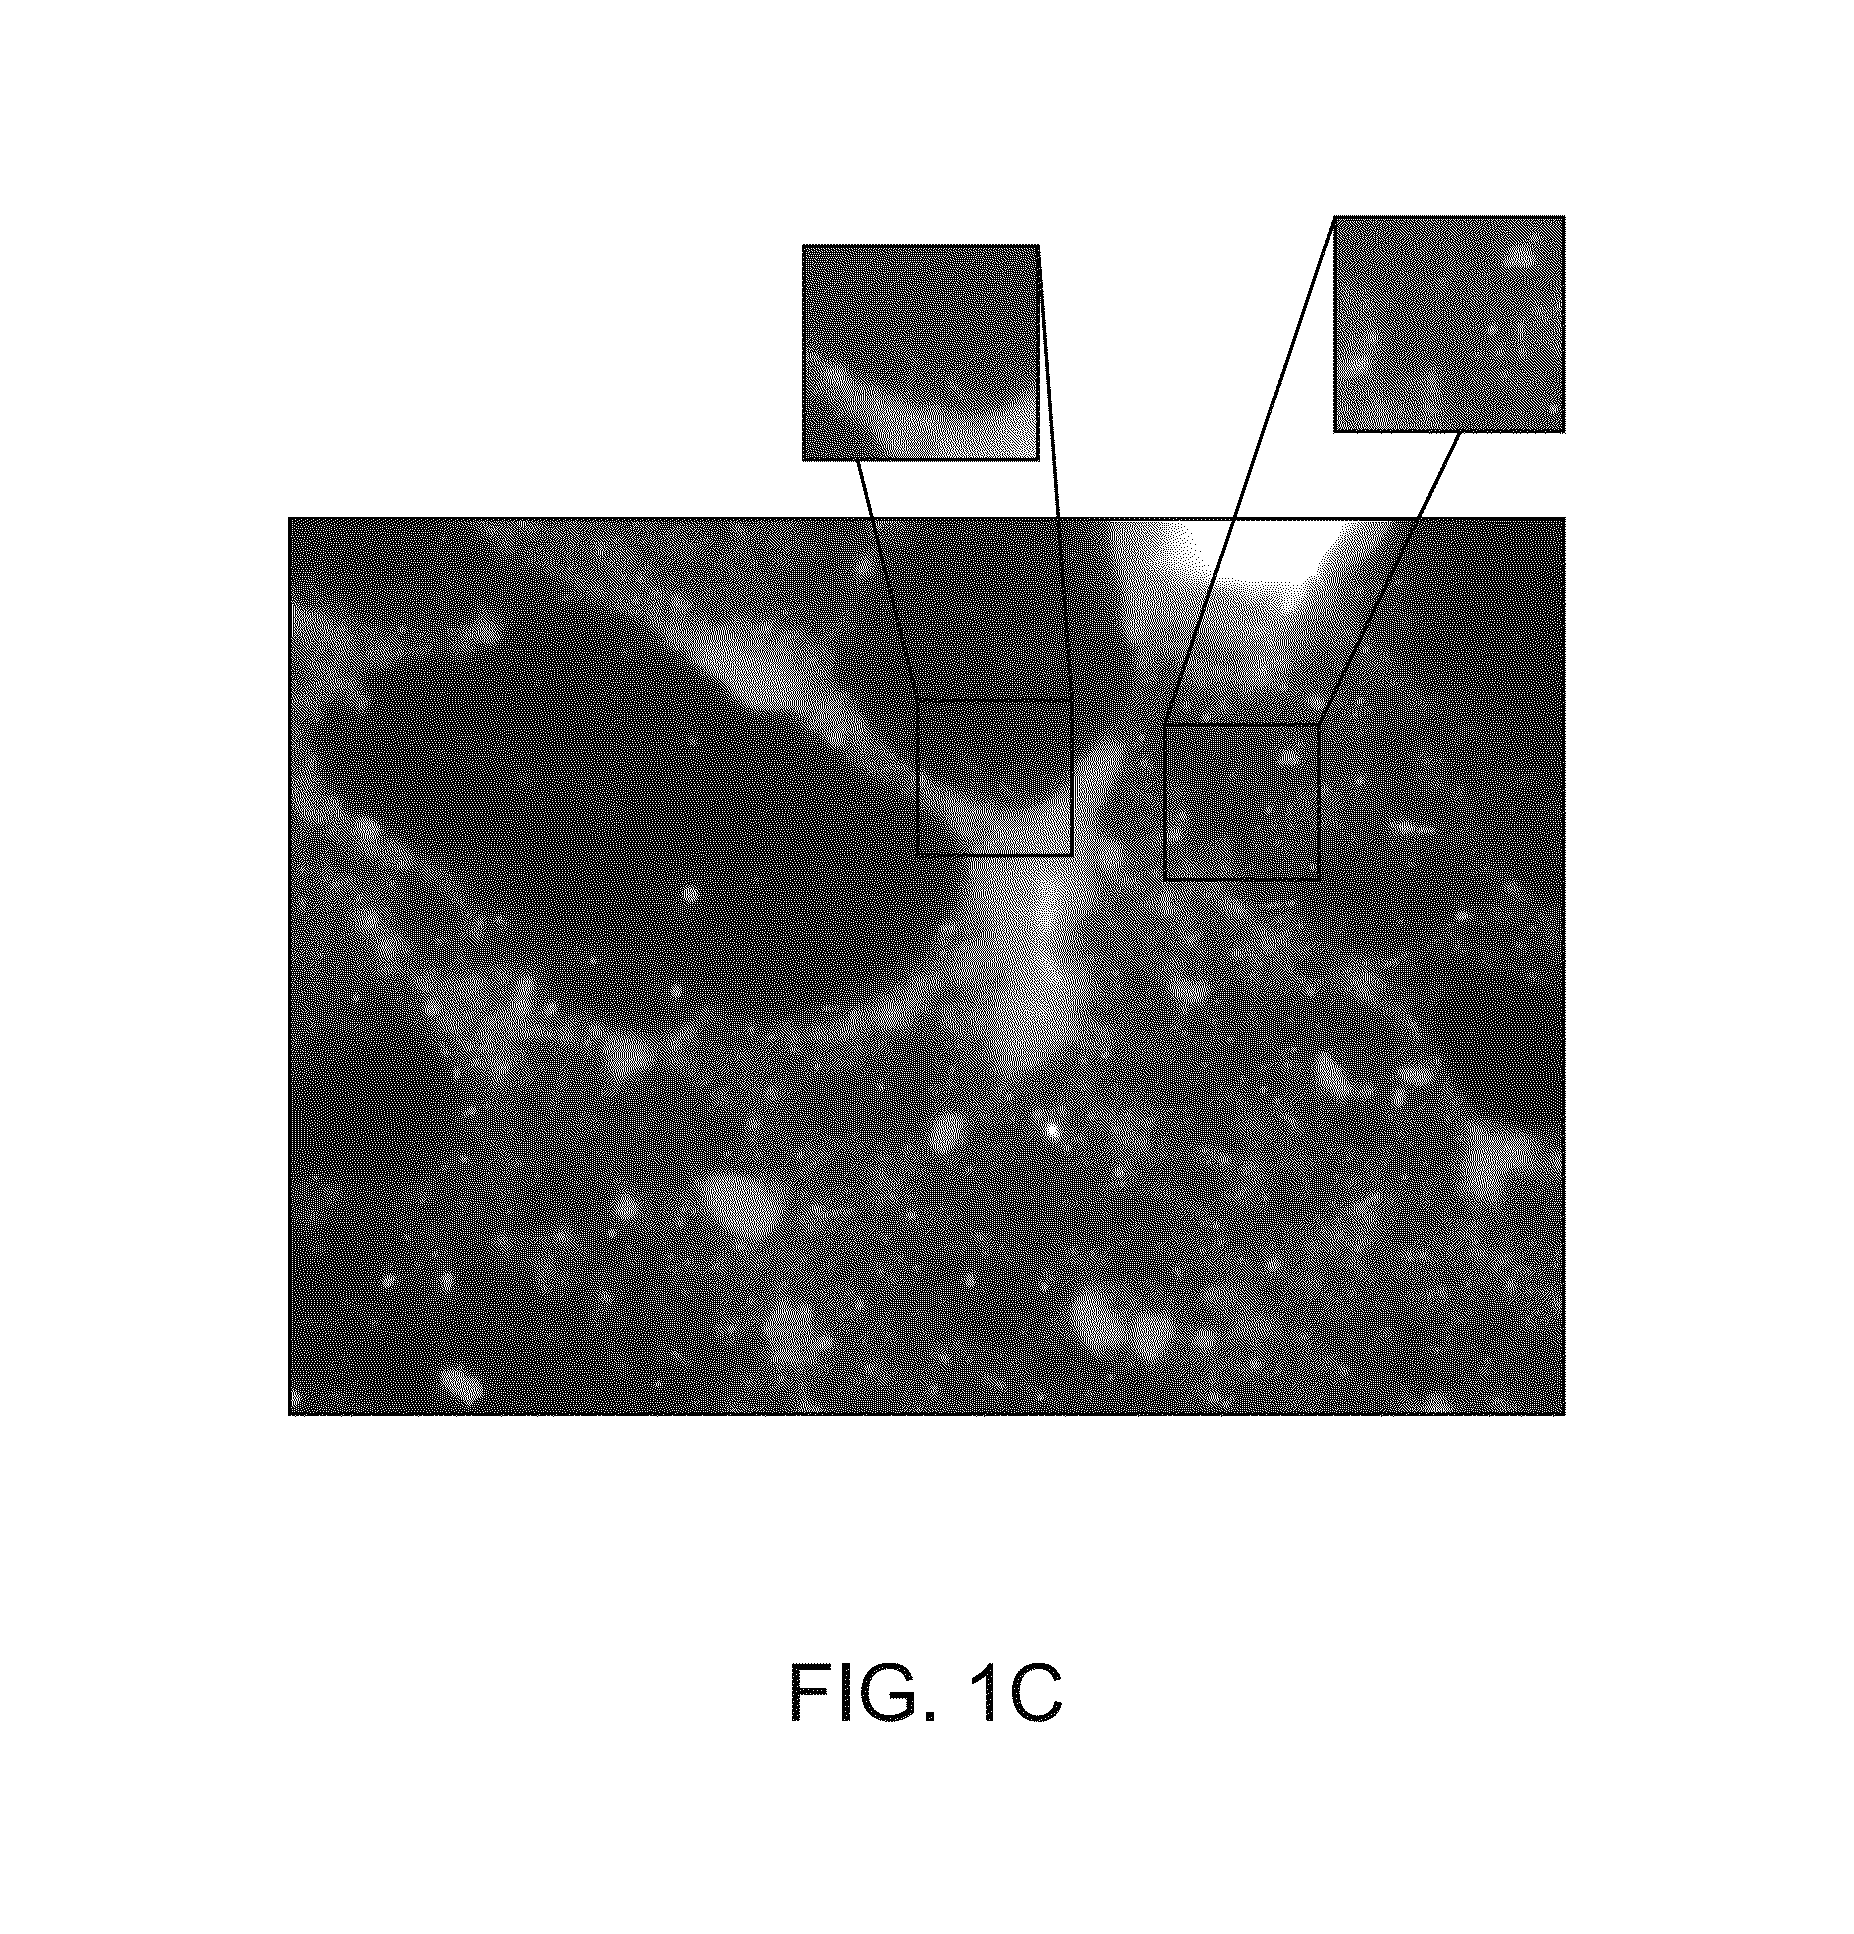 Compositions and methods for the removal of biofilms